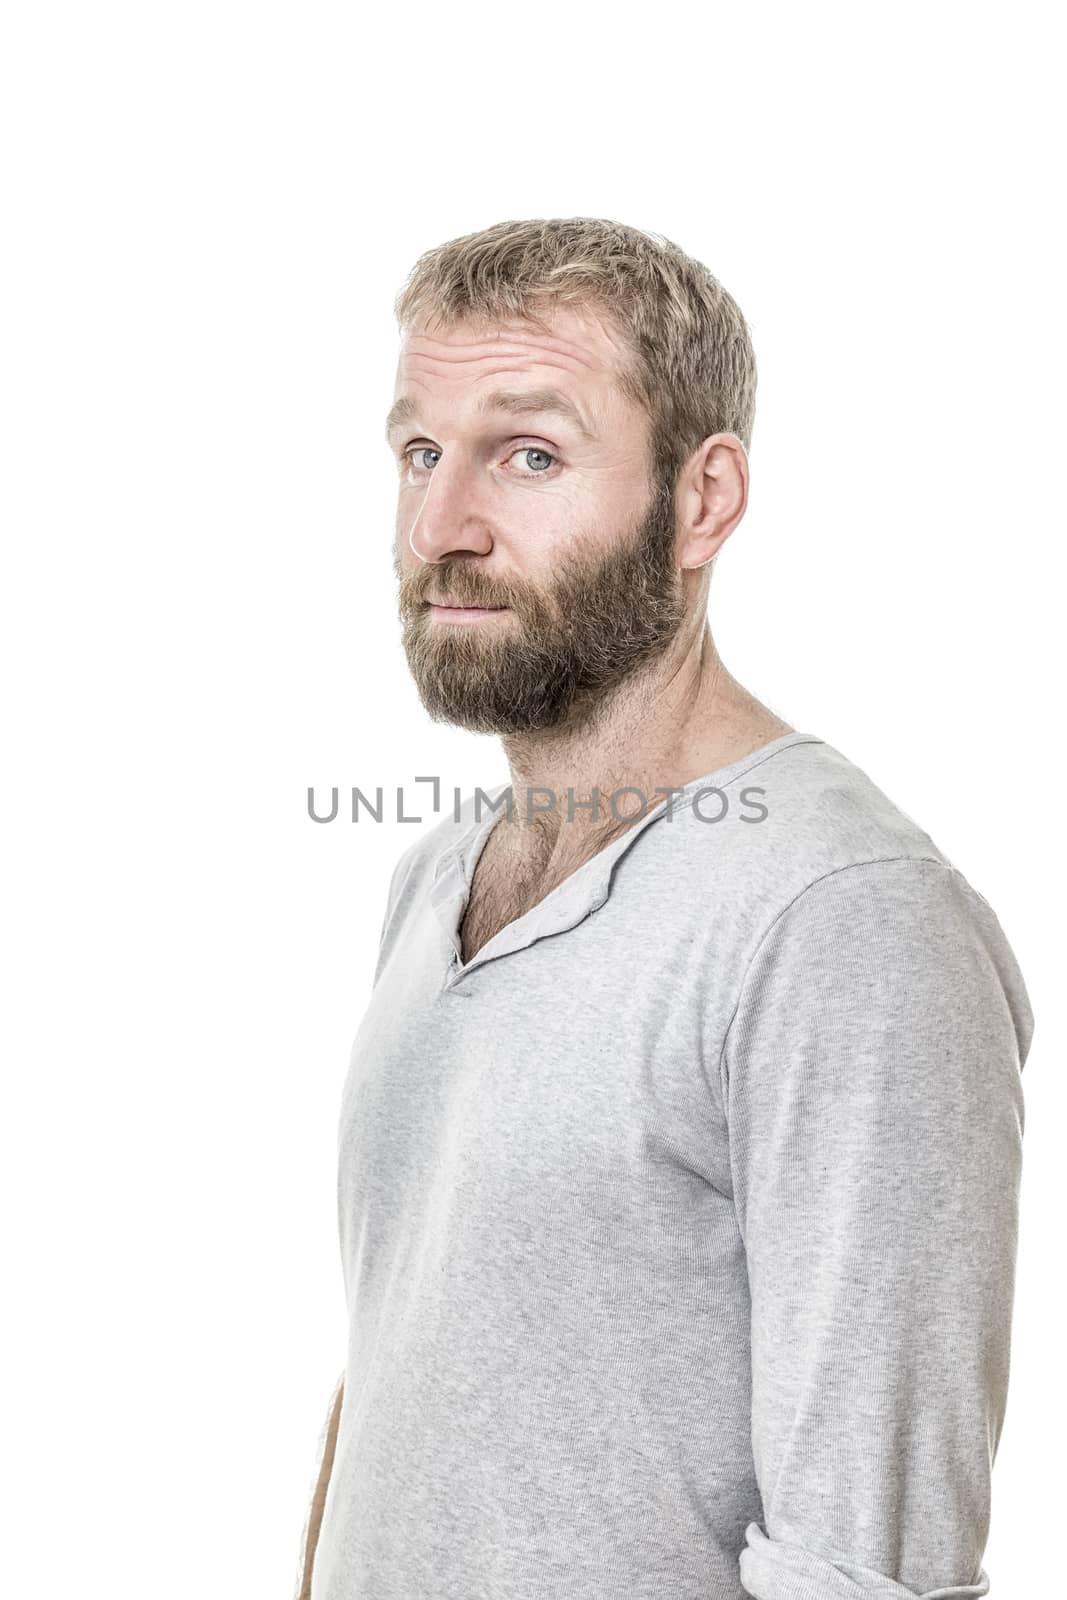 An image of a handsome bearded man casual